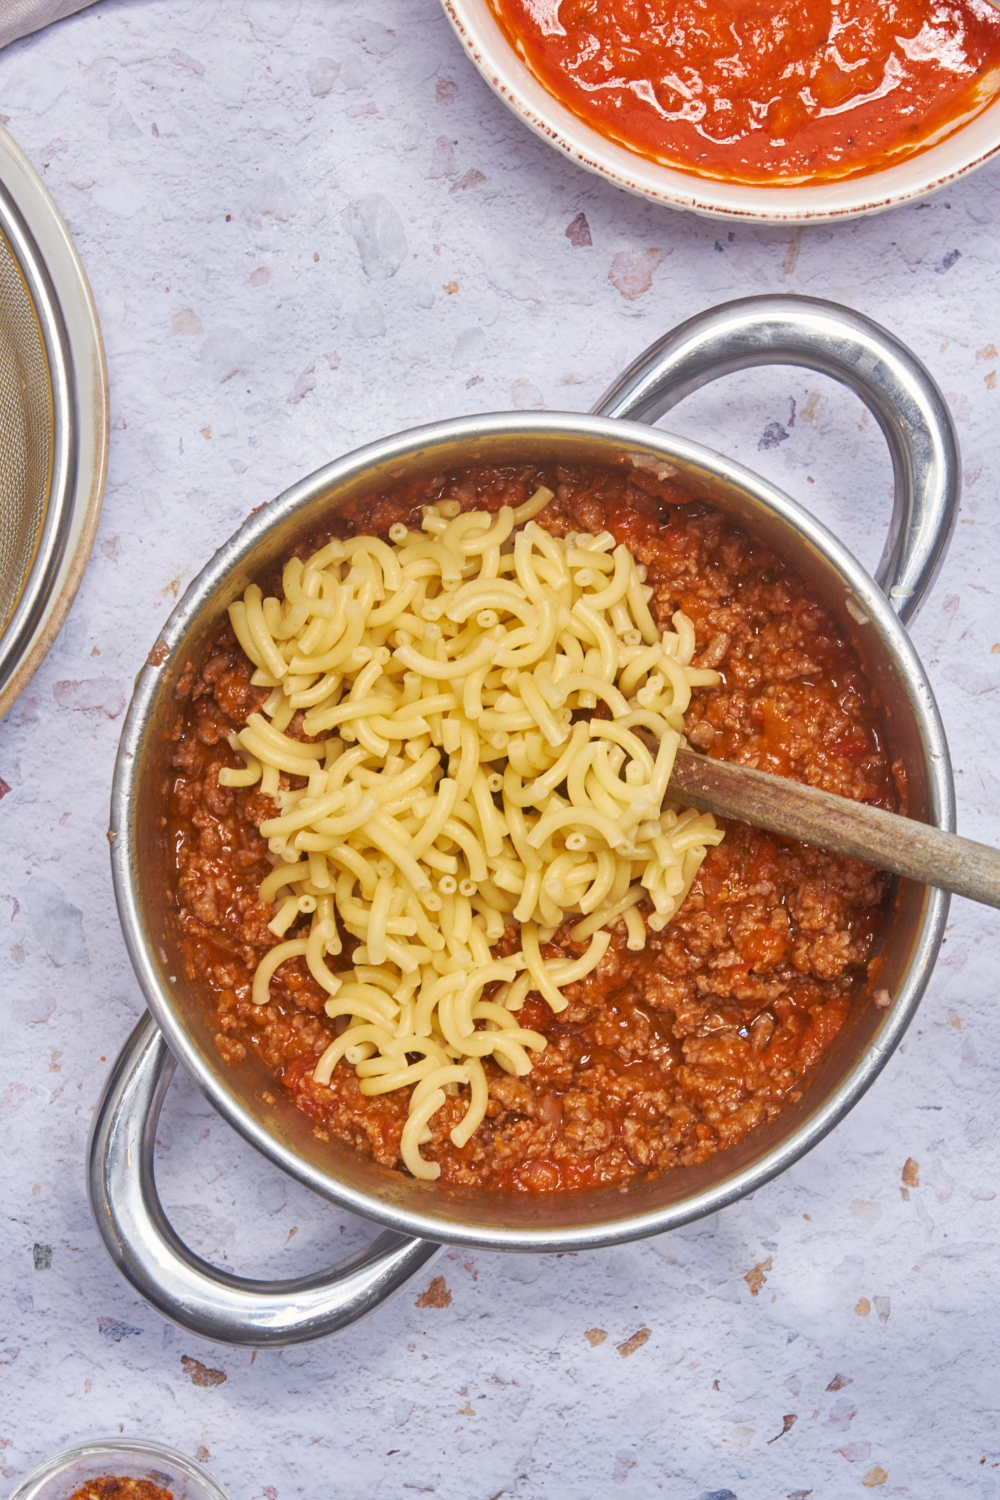 A large pot with two handles filled with a tomato and meat sauce and cooked macaroni noodles freshly added to the pot.